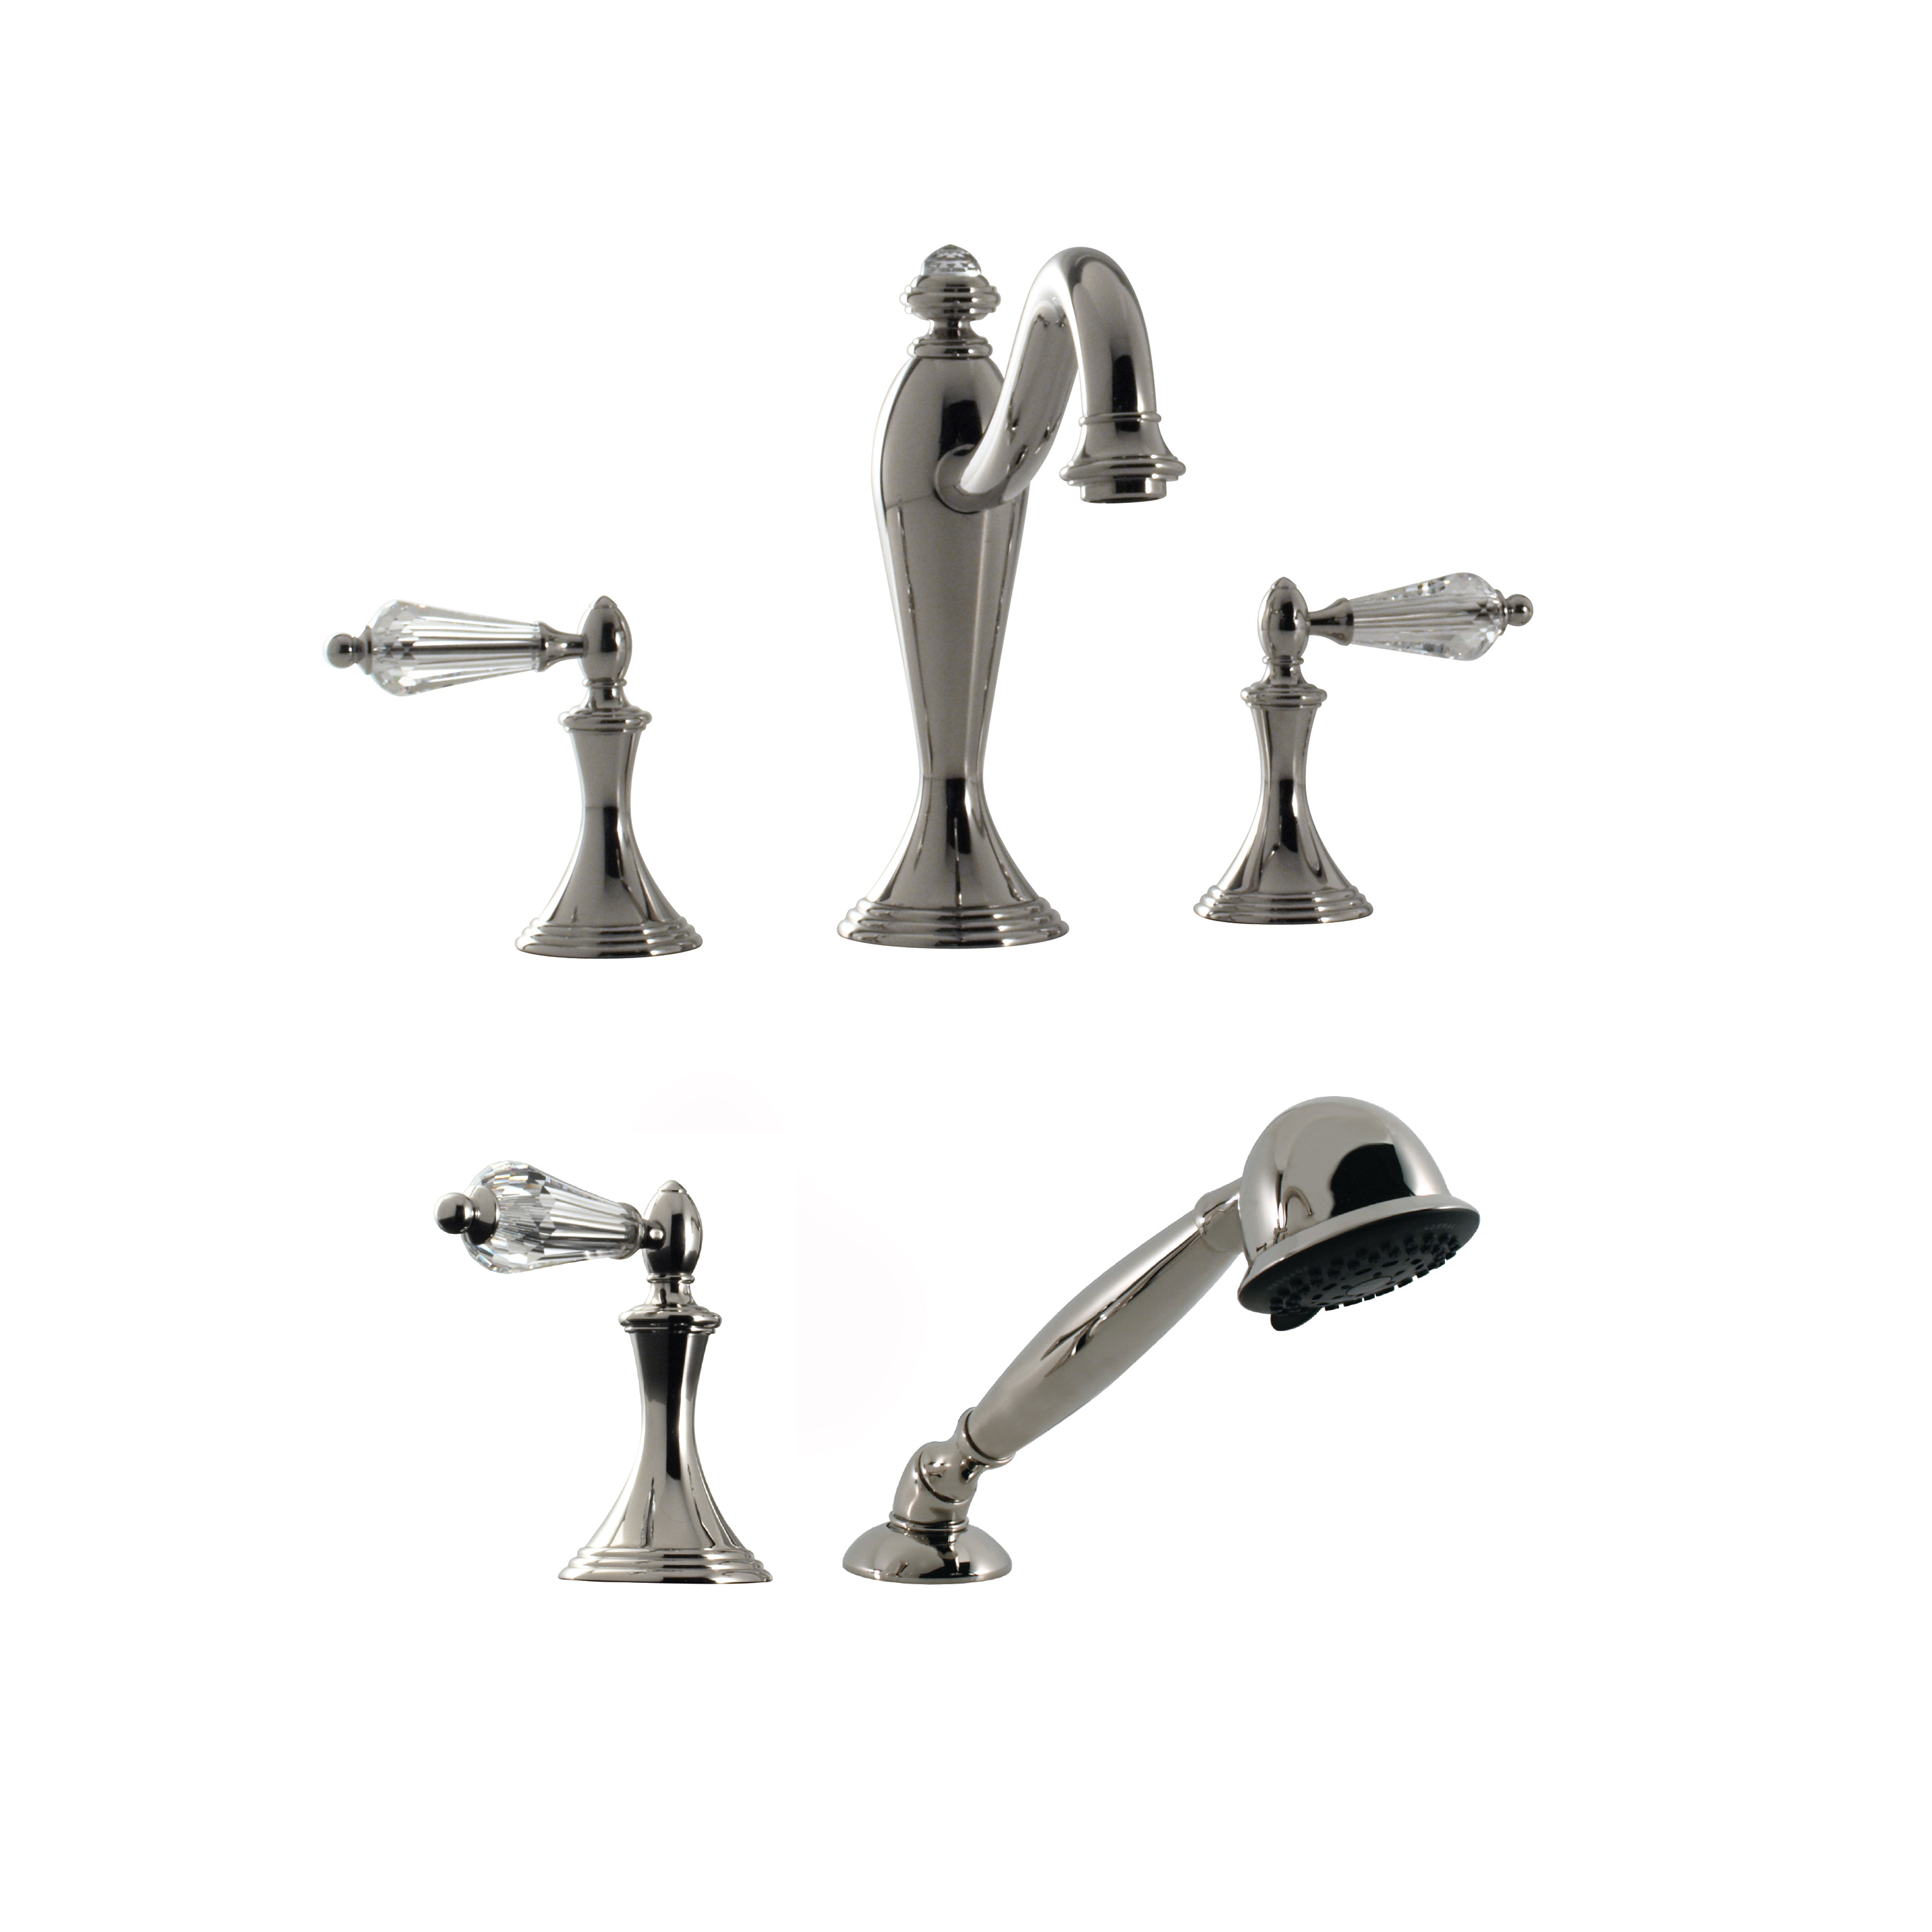 Santec 2555YC10 Lear Crystal Roman Tub Filler Set with Hand Held Shower with "YC" Handles - Polished Chrome - Click Image to Close